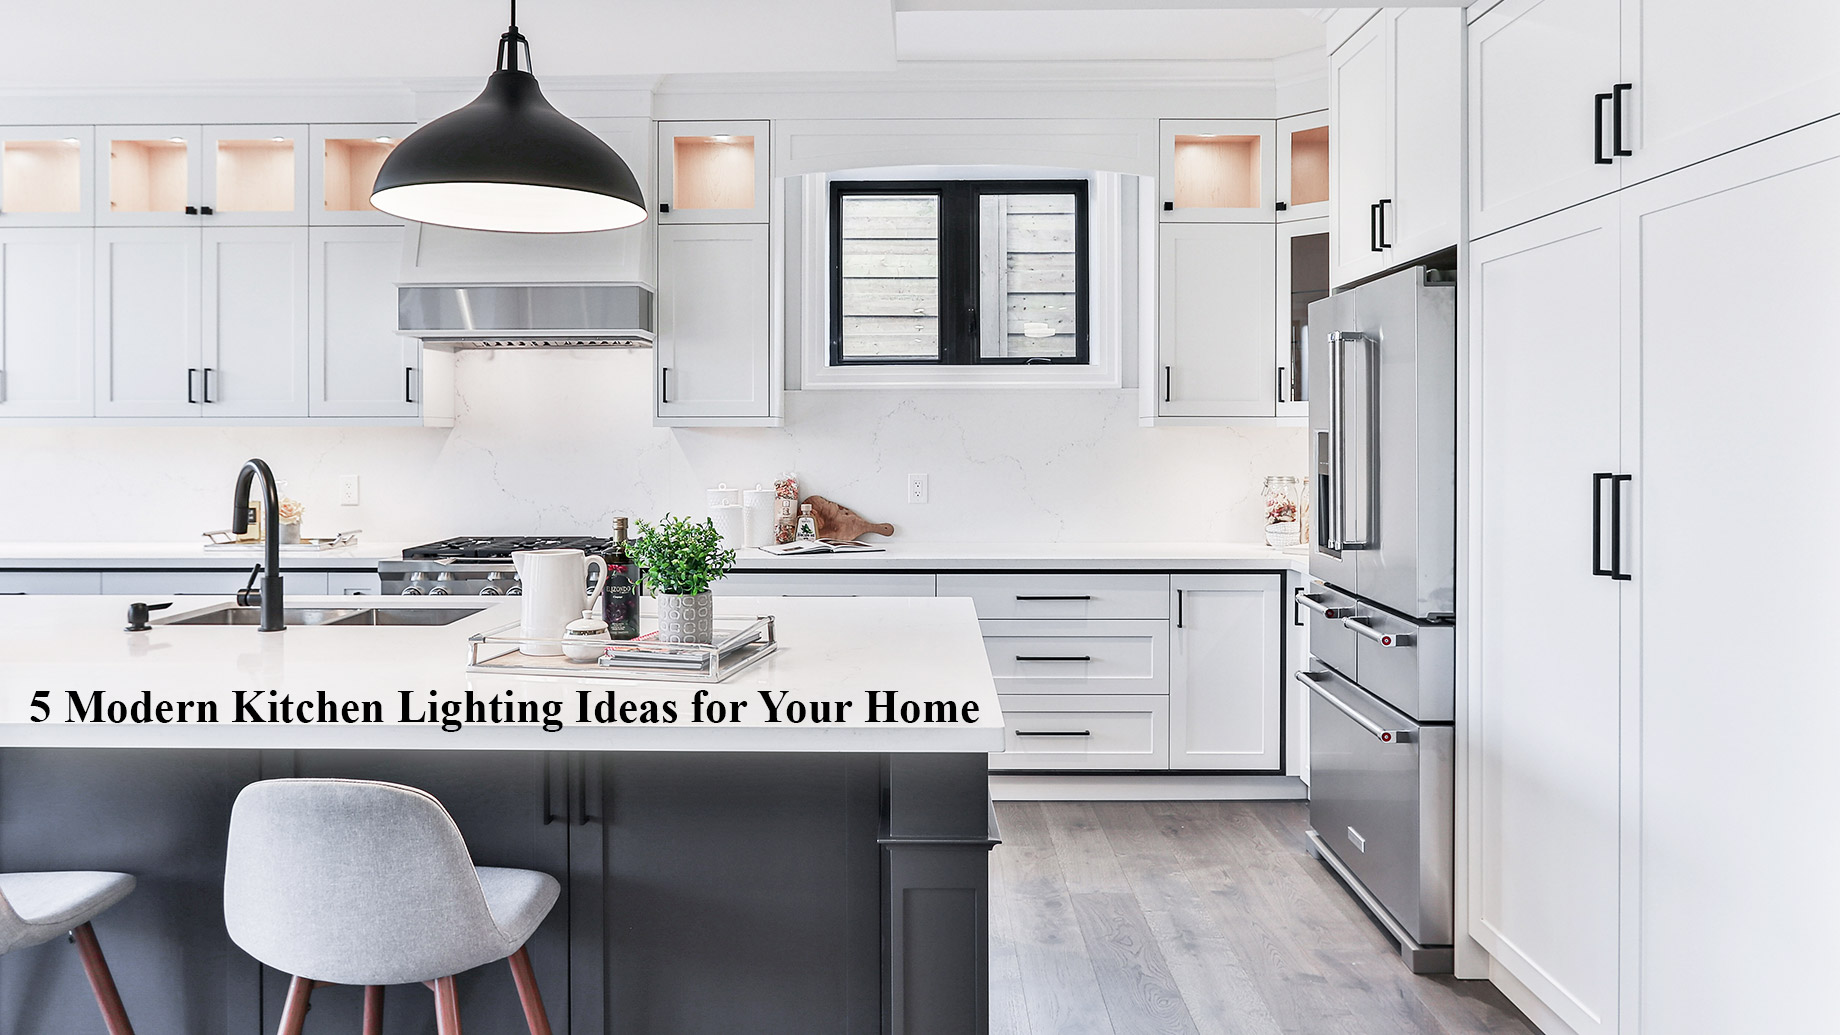 5 Modern Kitchen Lighting Ideas for Your Home